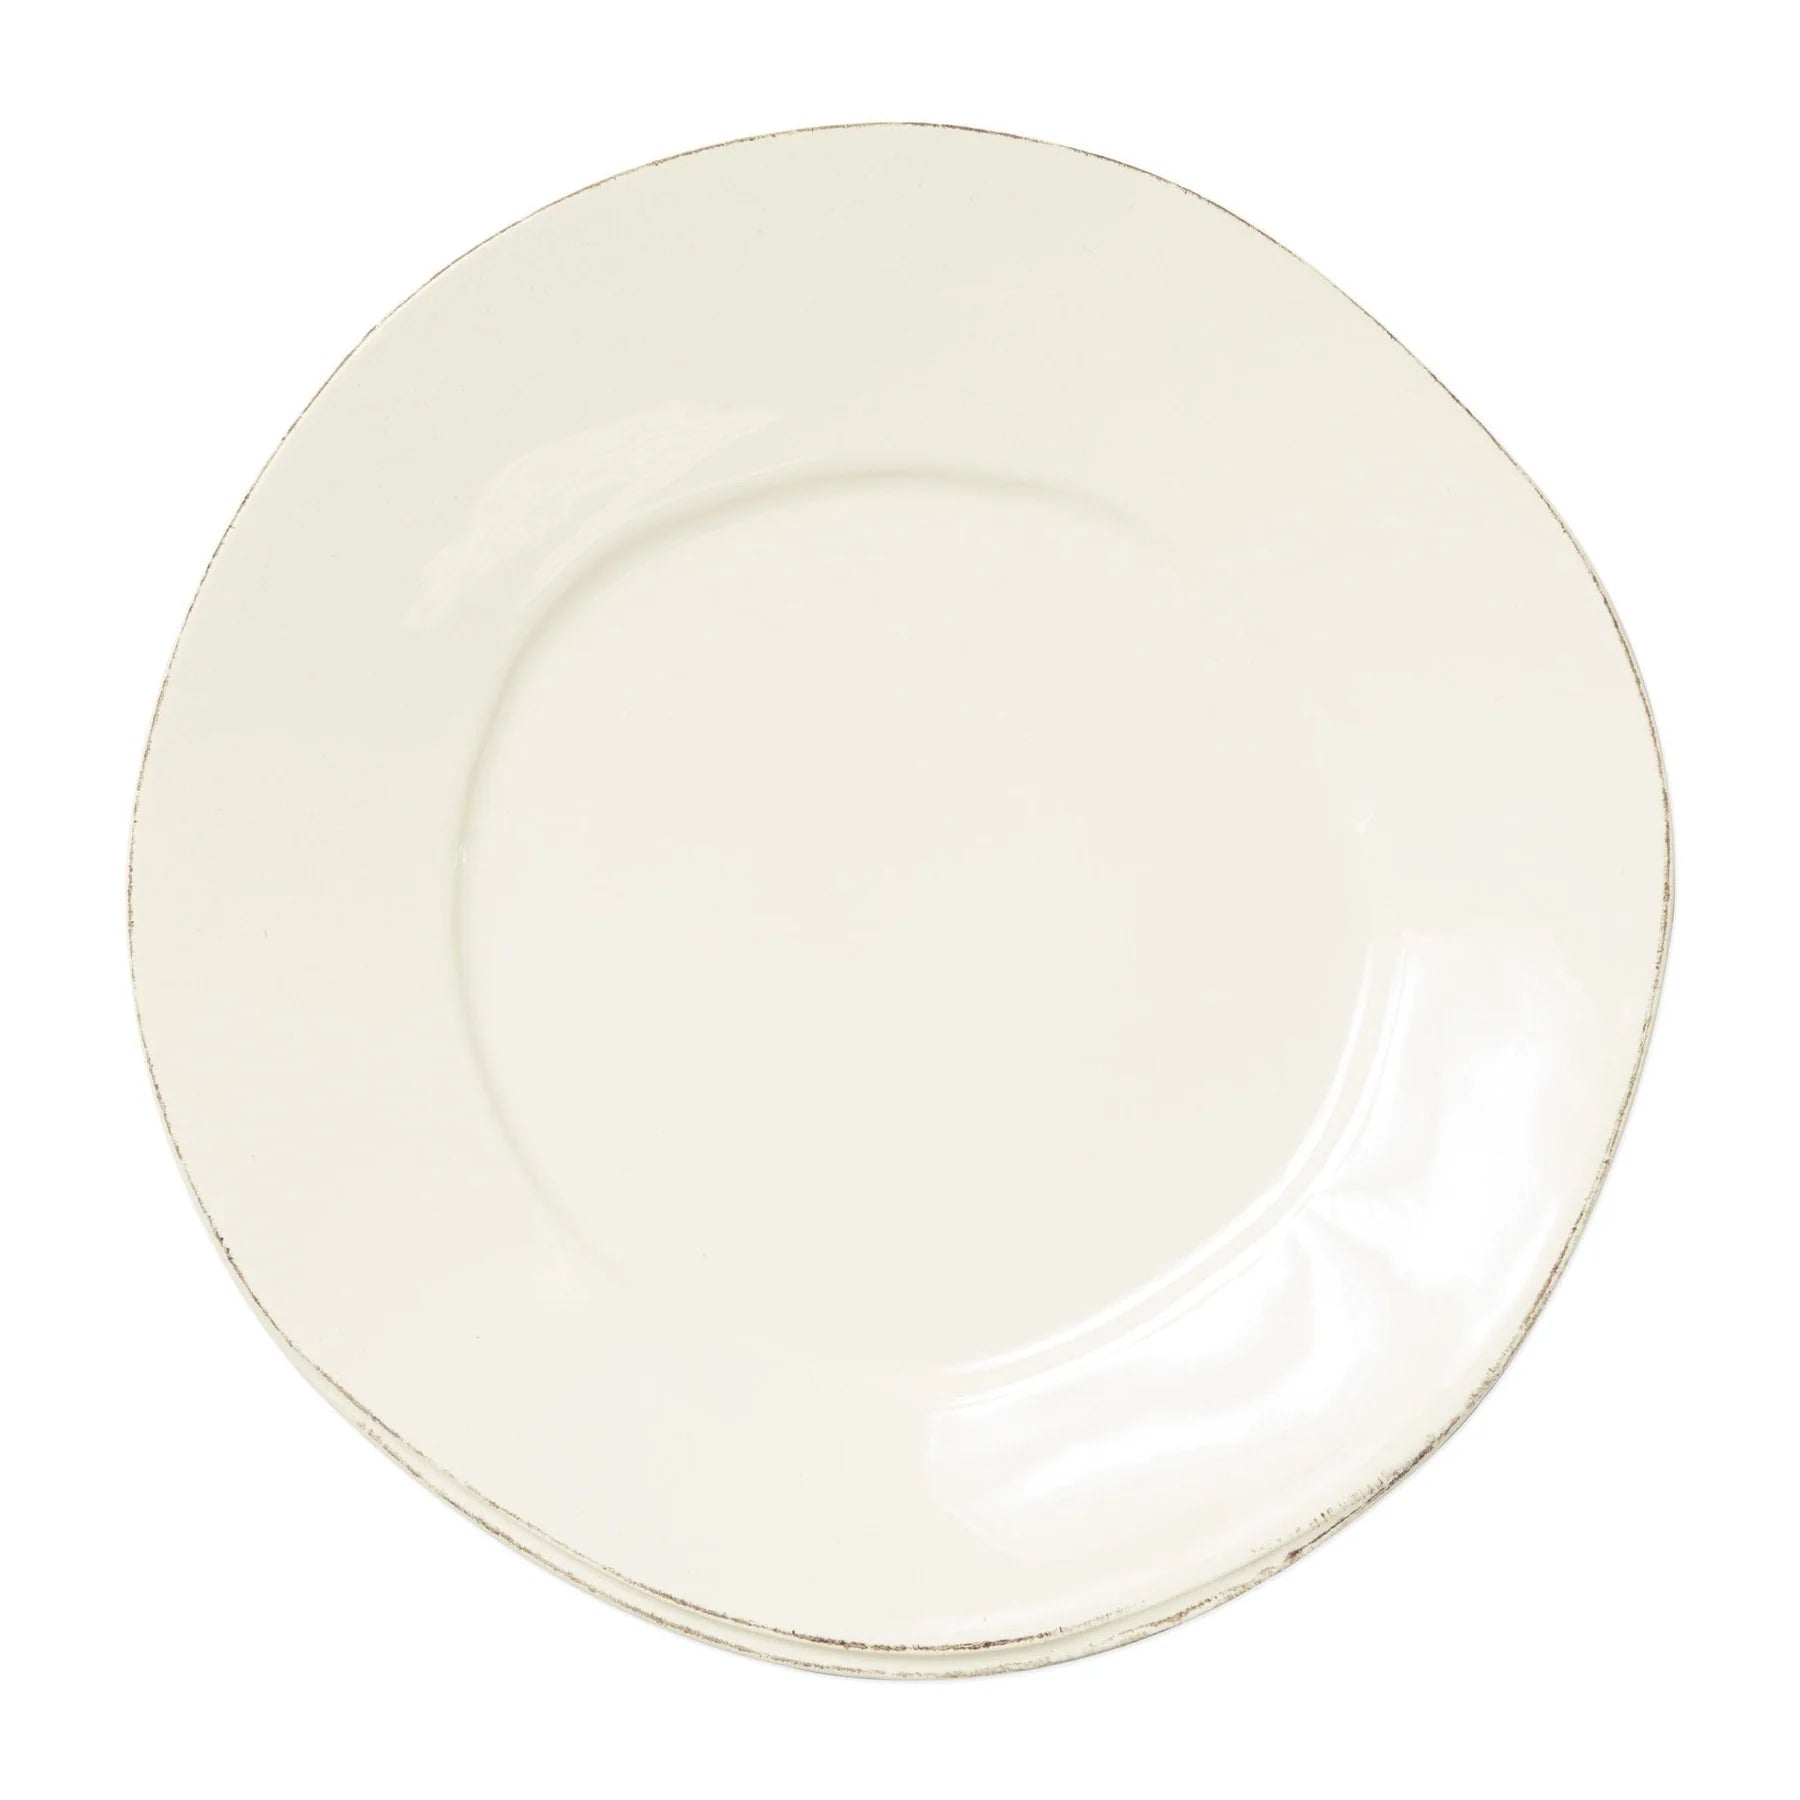 Vietri Lastra Linen colored dnner plate on a white background